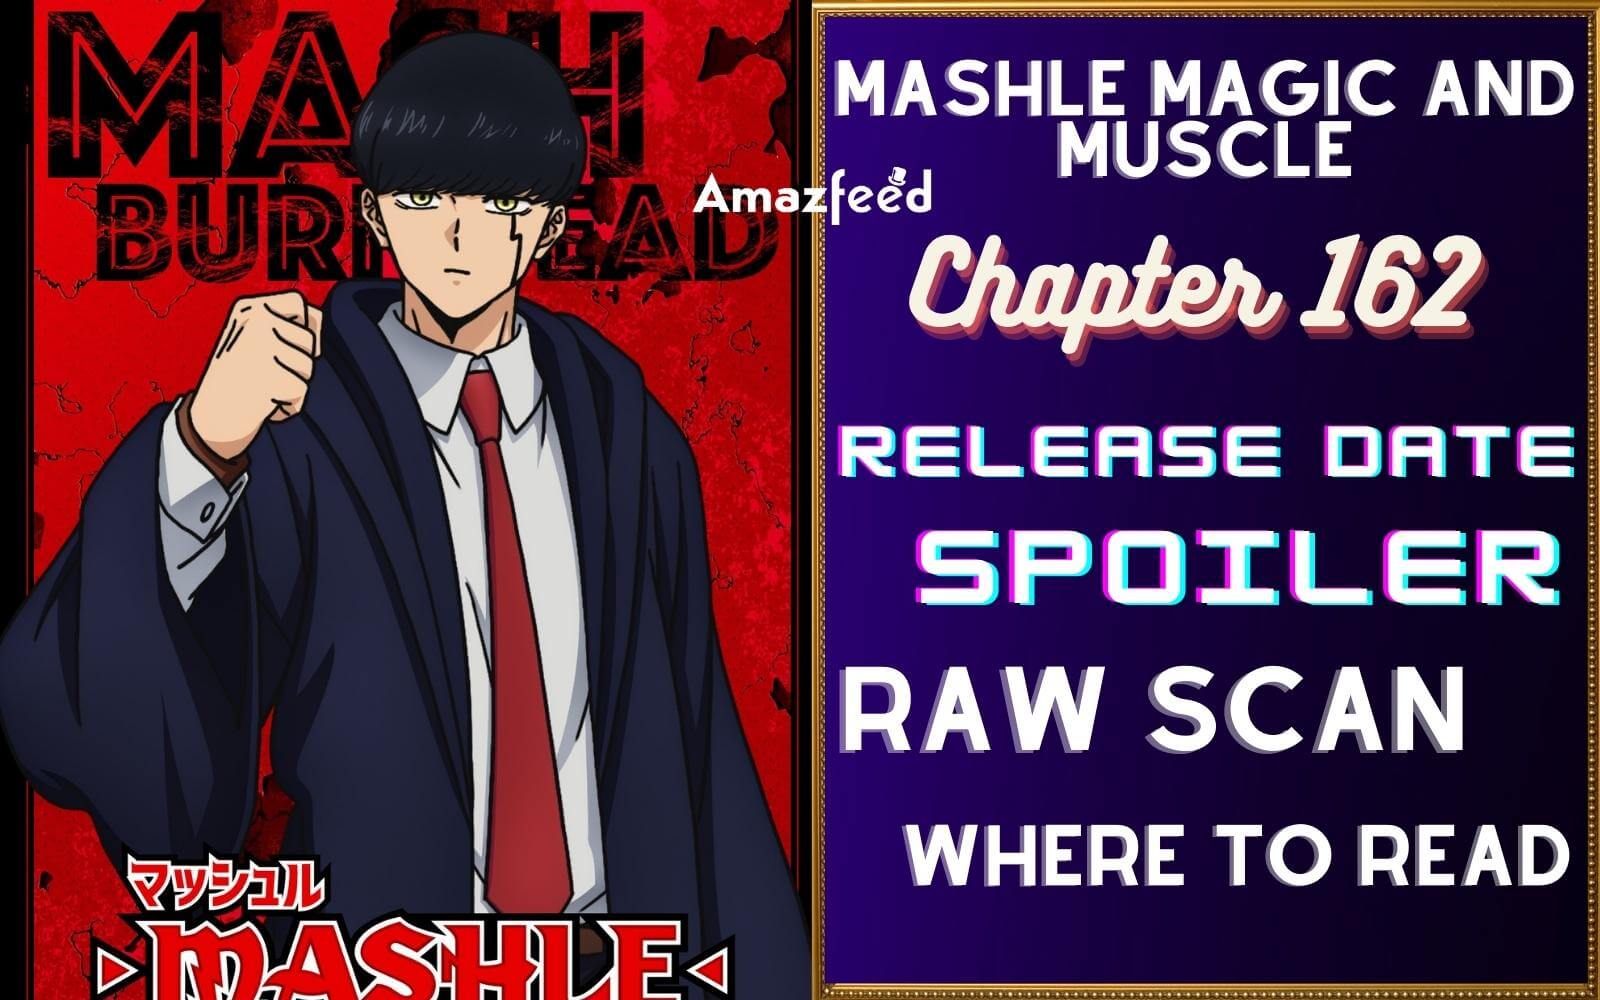 Mashle – Magic and Muscles, Chapter 162